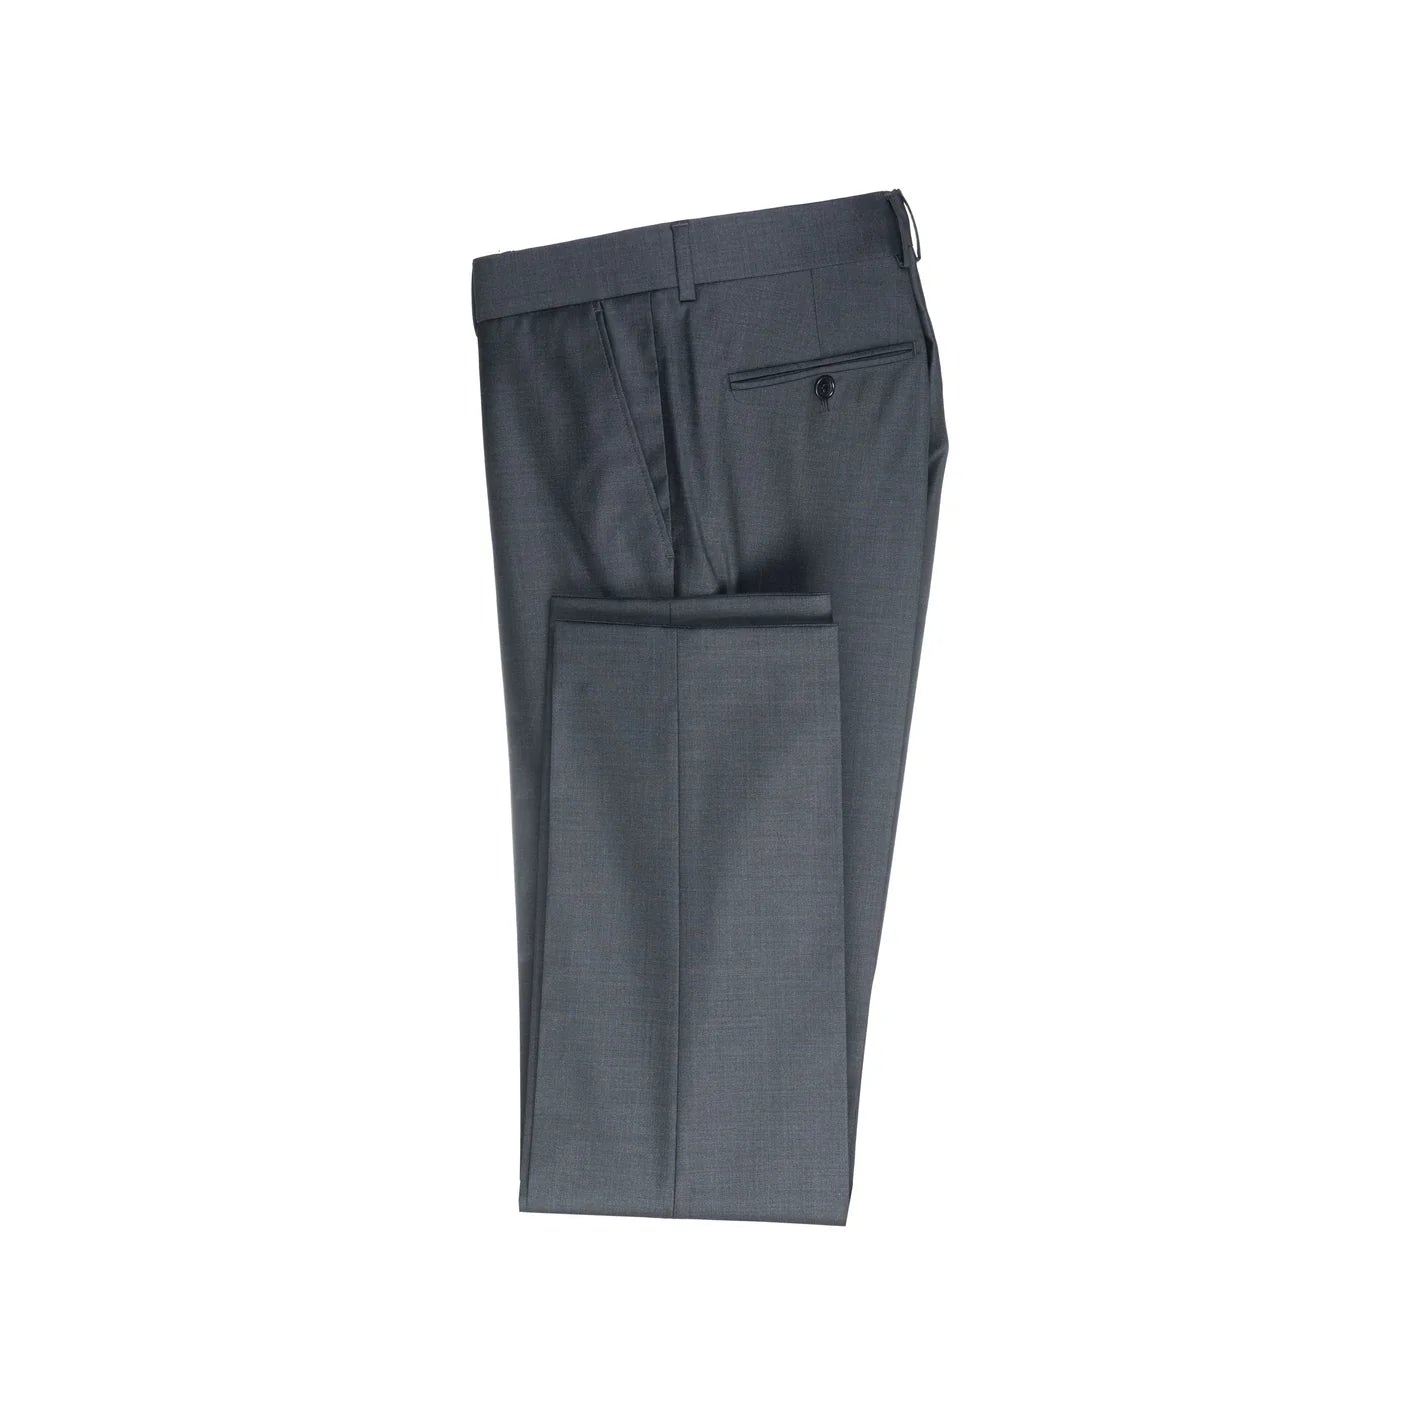 Men's Bagozza Sirio Trousers with Piped back pocket & Slit front pockets in charcoal (3219) - available in-store, 337 Monty Naicker Street, Durban CBD or online at Omar's Tailors & Outfitters online store.   A men's fashion curation for South African men - established in 1911.